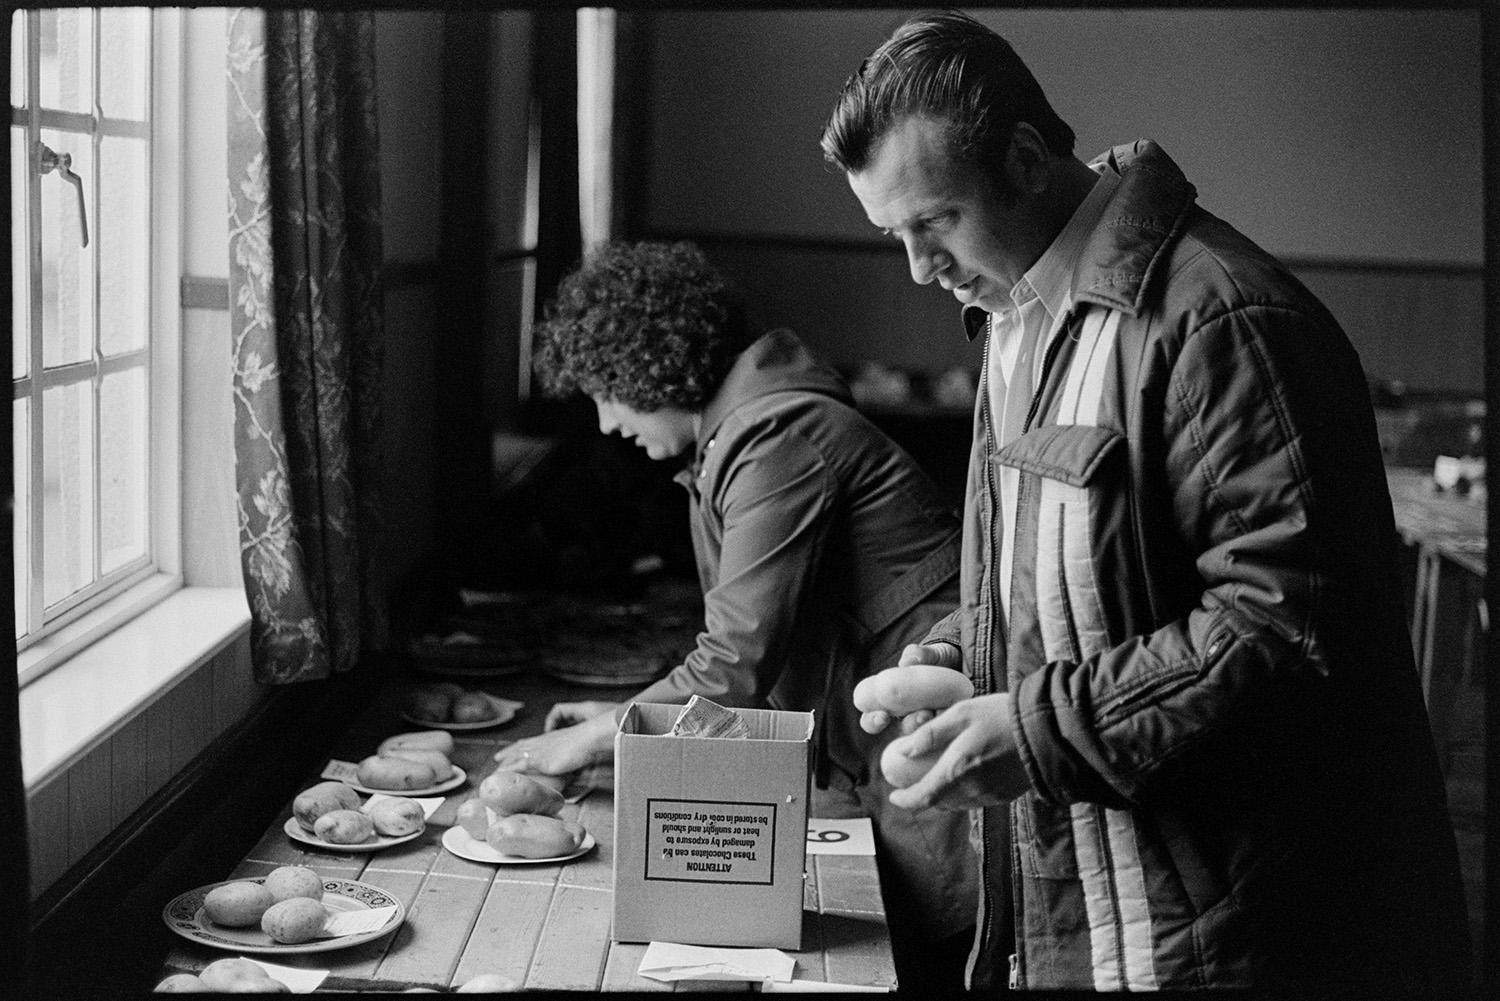 People bringing in entries for flower show and arranging them in village hall. 
[A man and woman arranging potato entries on plates at Dolton Flower Show in Dolton Village Hall.]